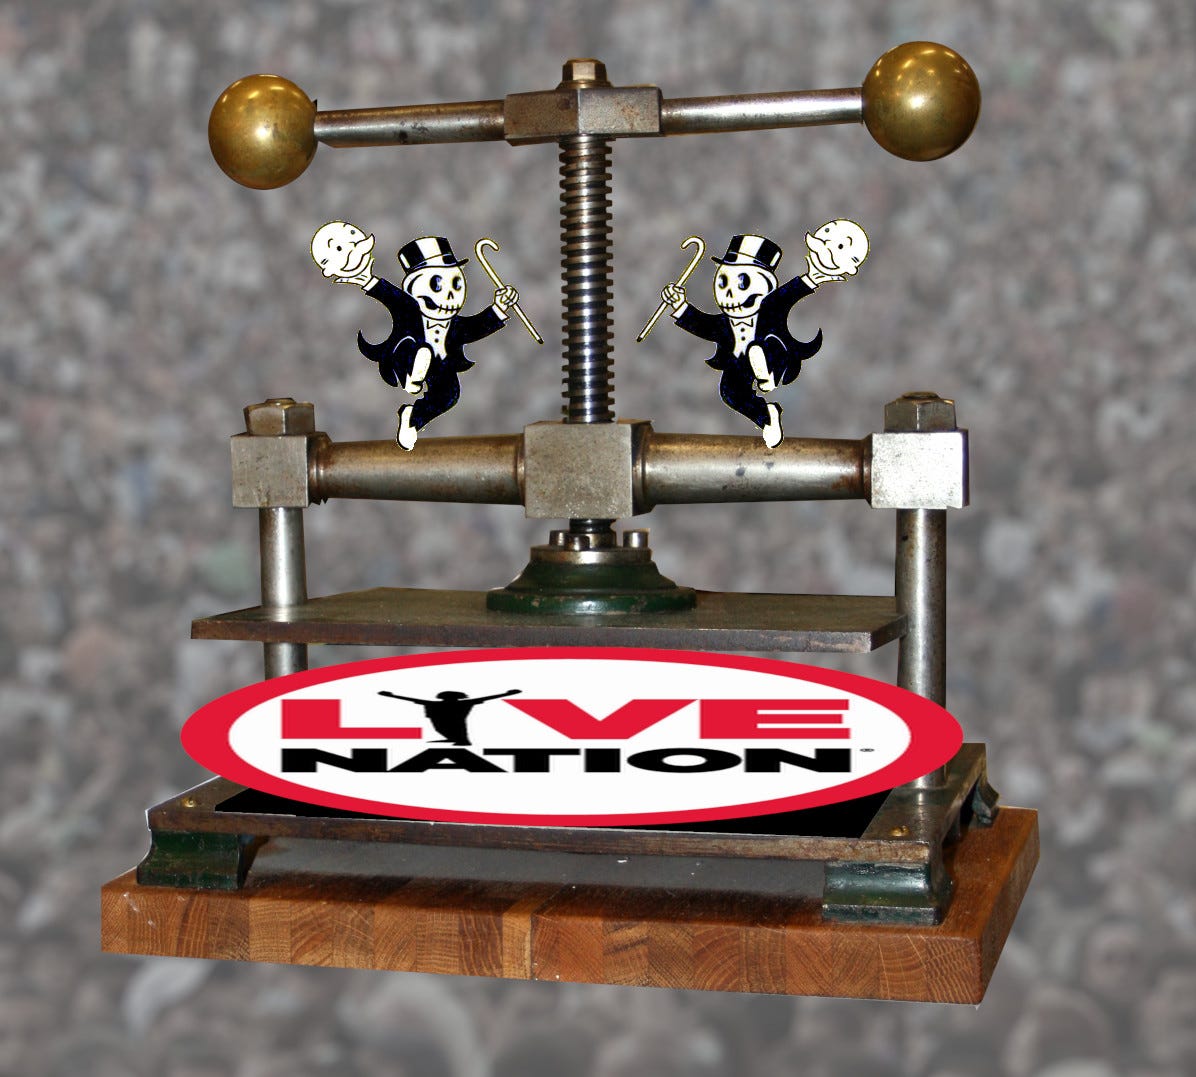 A screw press that has crushed a Live Nation logo. A pair of Monopoly Rich Uncle Pennybags men dance on the press, having removed their faces to reveal death’s-head skulls behind them. In the background, a faded, blurred image of a festival crowd. Image: Guzmán Lozano (modified) https://www.flickr.com/photos/pictfactory/2796367140 CC BY: https://creativecommons.org/licenses/by/2.0/ LA2 (modified) https://commons.wikimedia.org/wiki/File:Bokpress_2010_1.jpg CC BY-SA: https://creativecommons.or